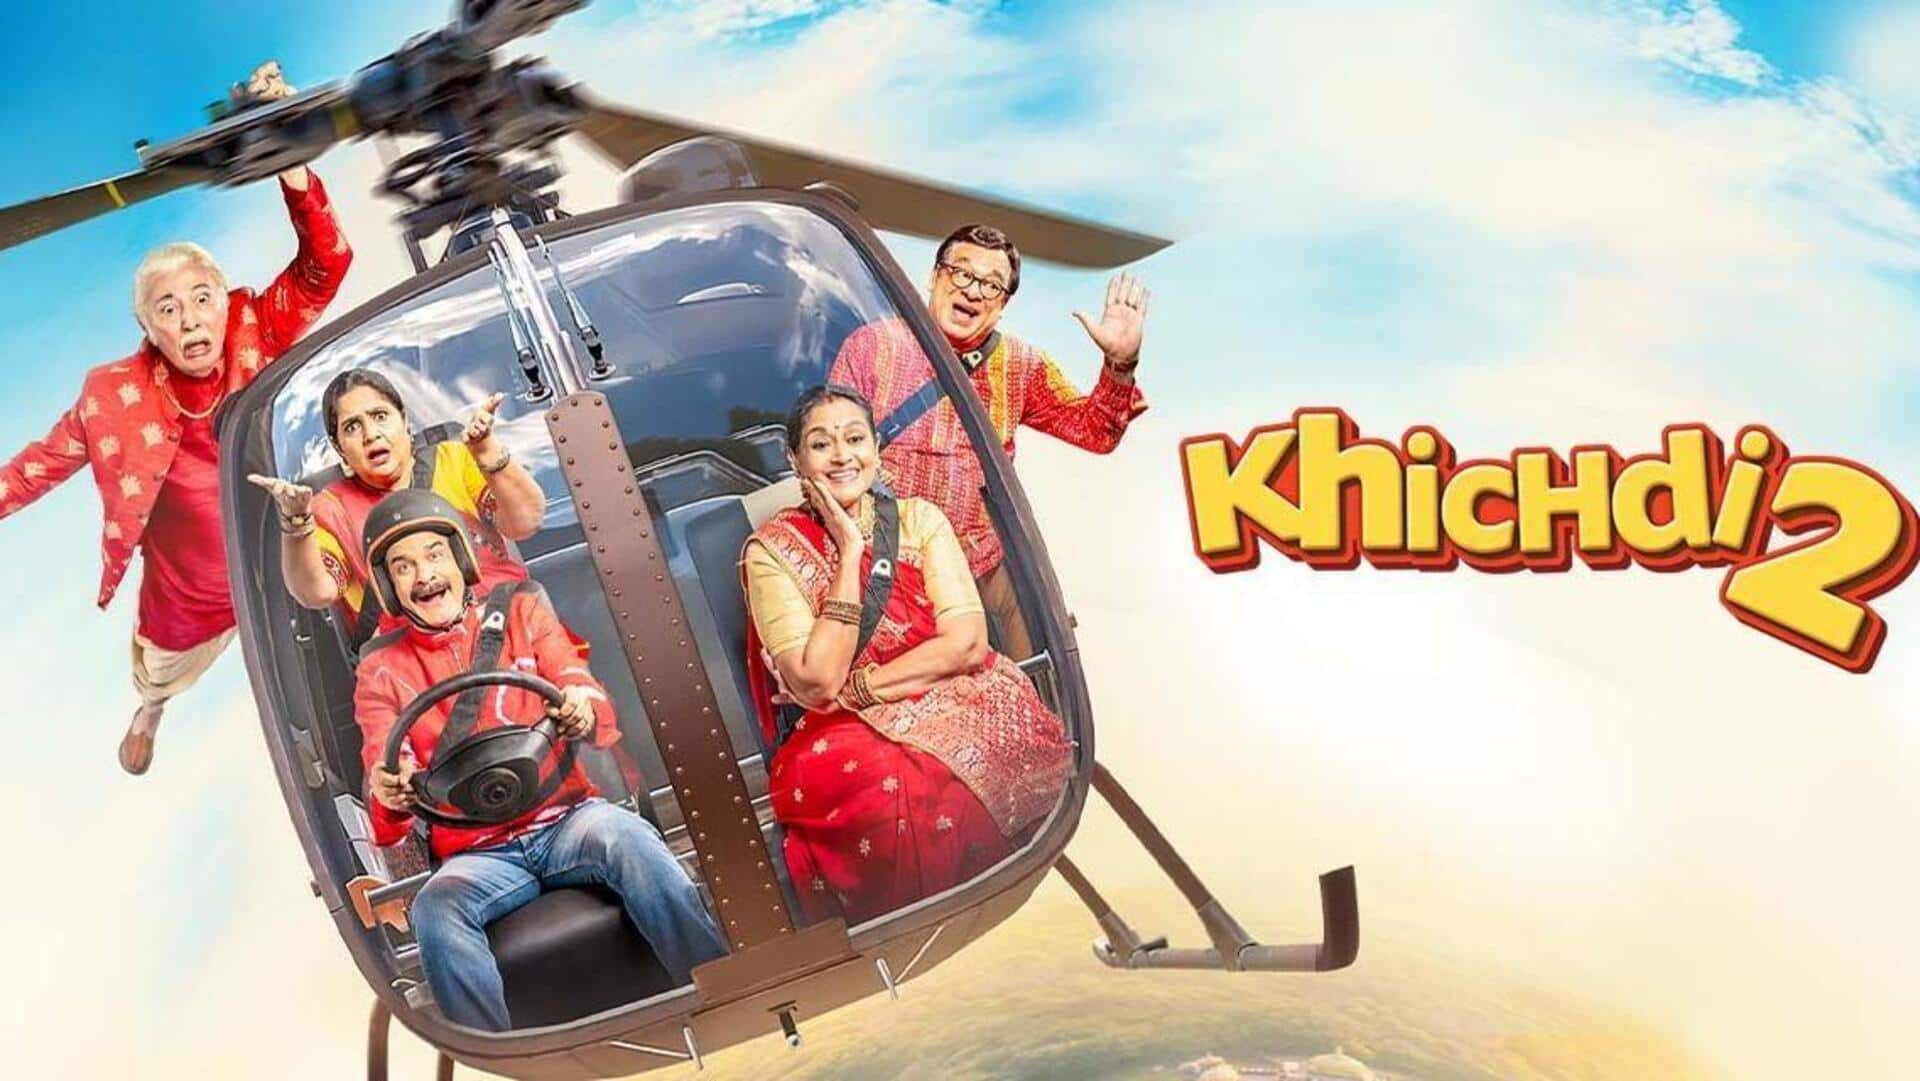 Box office collection: 'Khichdi 2' is stale with no cure